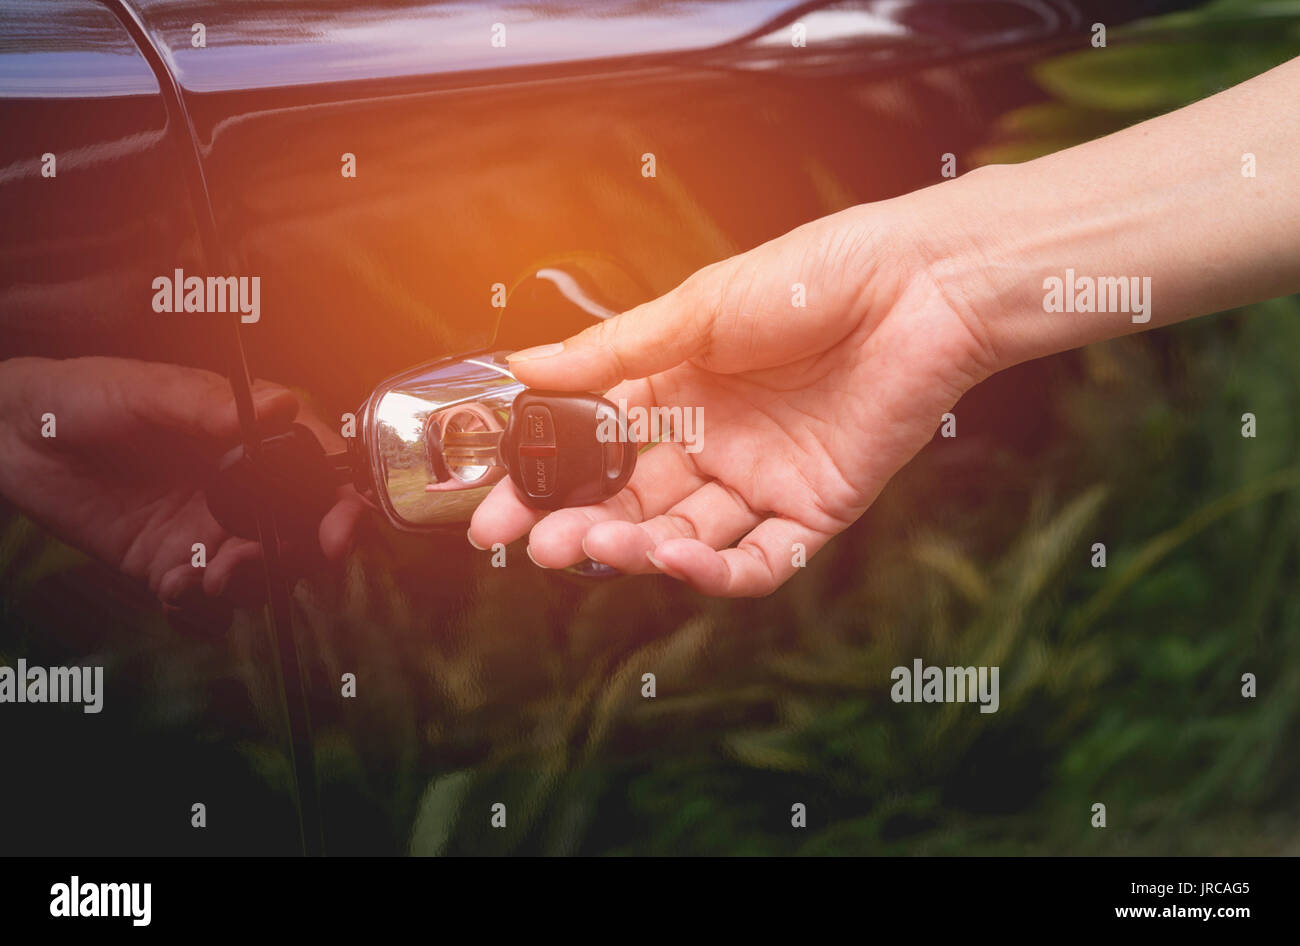 Close-up of woman opening a car door. Hand on handle. Female is opening a car. Stock Photo